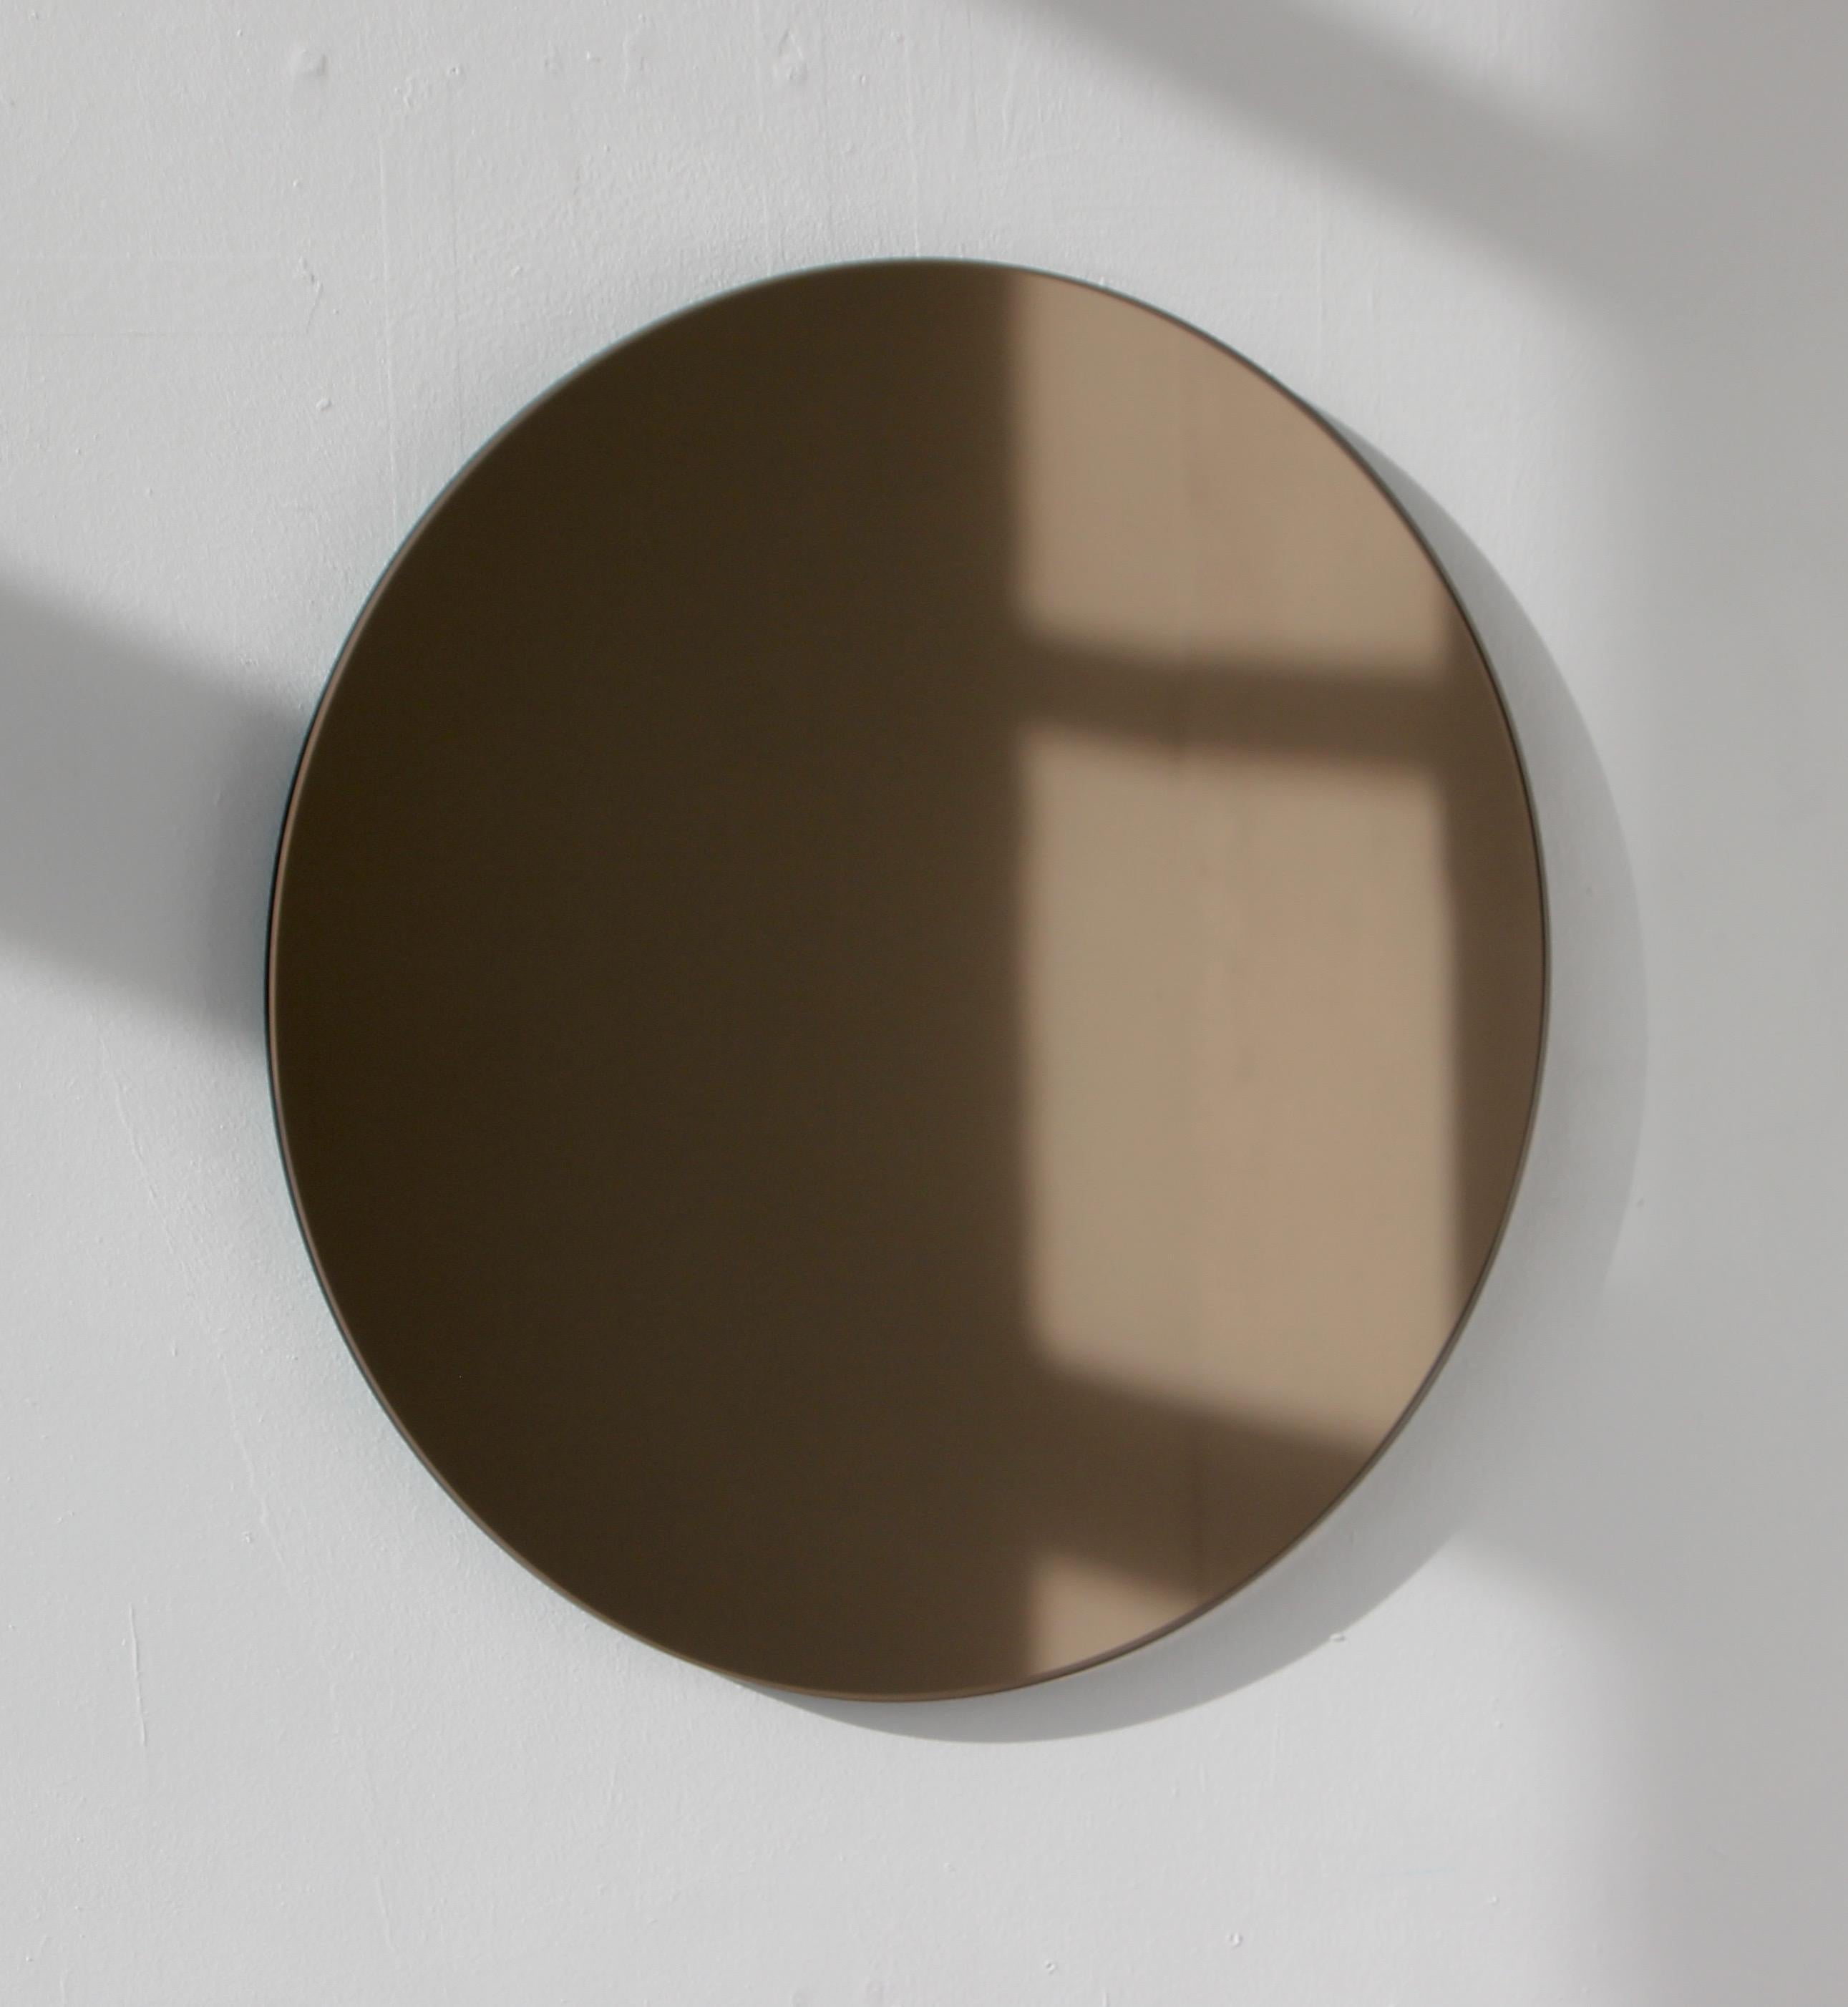 Charming and minimalist bronze tinted round frameless mirror with a floating effect. Quality design that ensures the mirror sits perfectly parallel to the wall. Designed and made in London, UK.

Fitted with professional plates not visible once